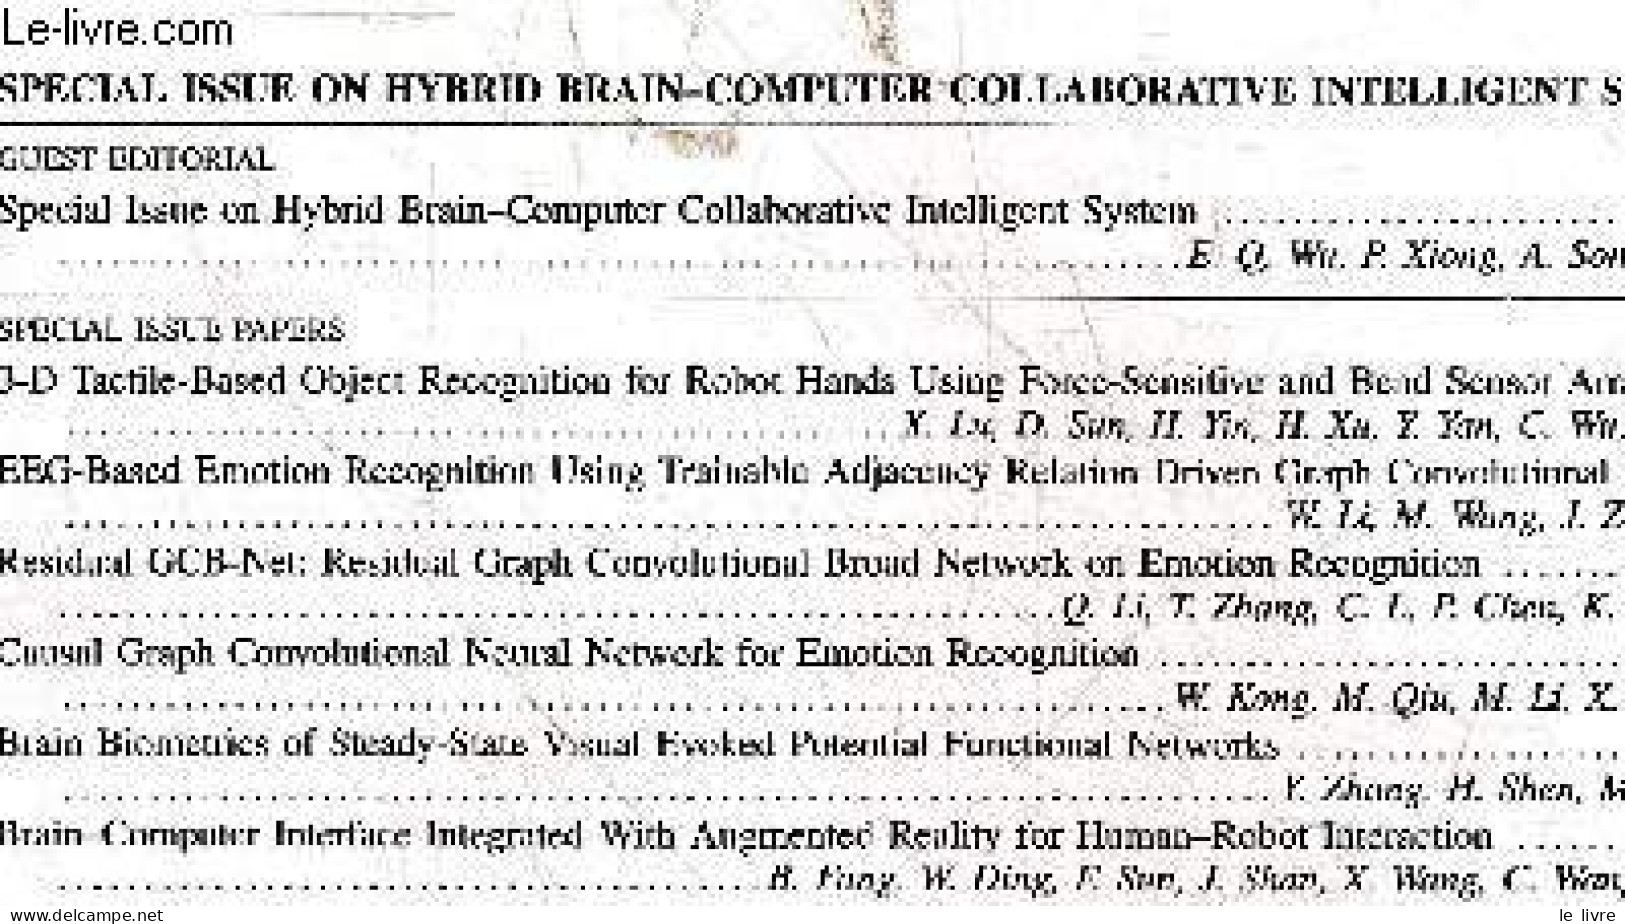 IEEE TRANSACTIONS ON COGNITIVE AND DEVELOPMENTAL SYSTEMS - DECEMBER 2023, VOLUME 15, N°4 - Special Issue On Hybrid Brain - Language Study